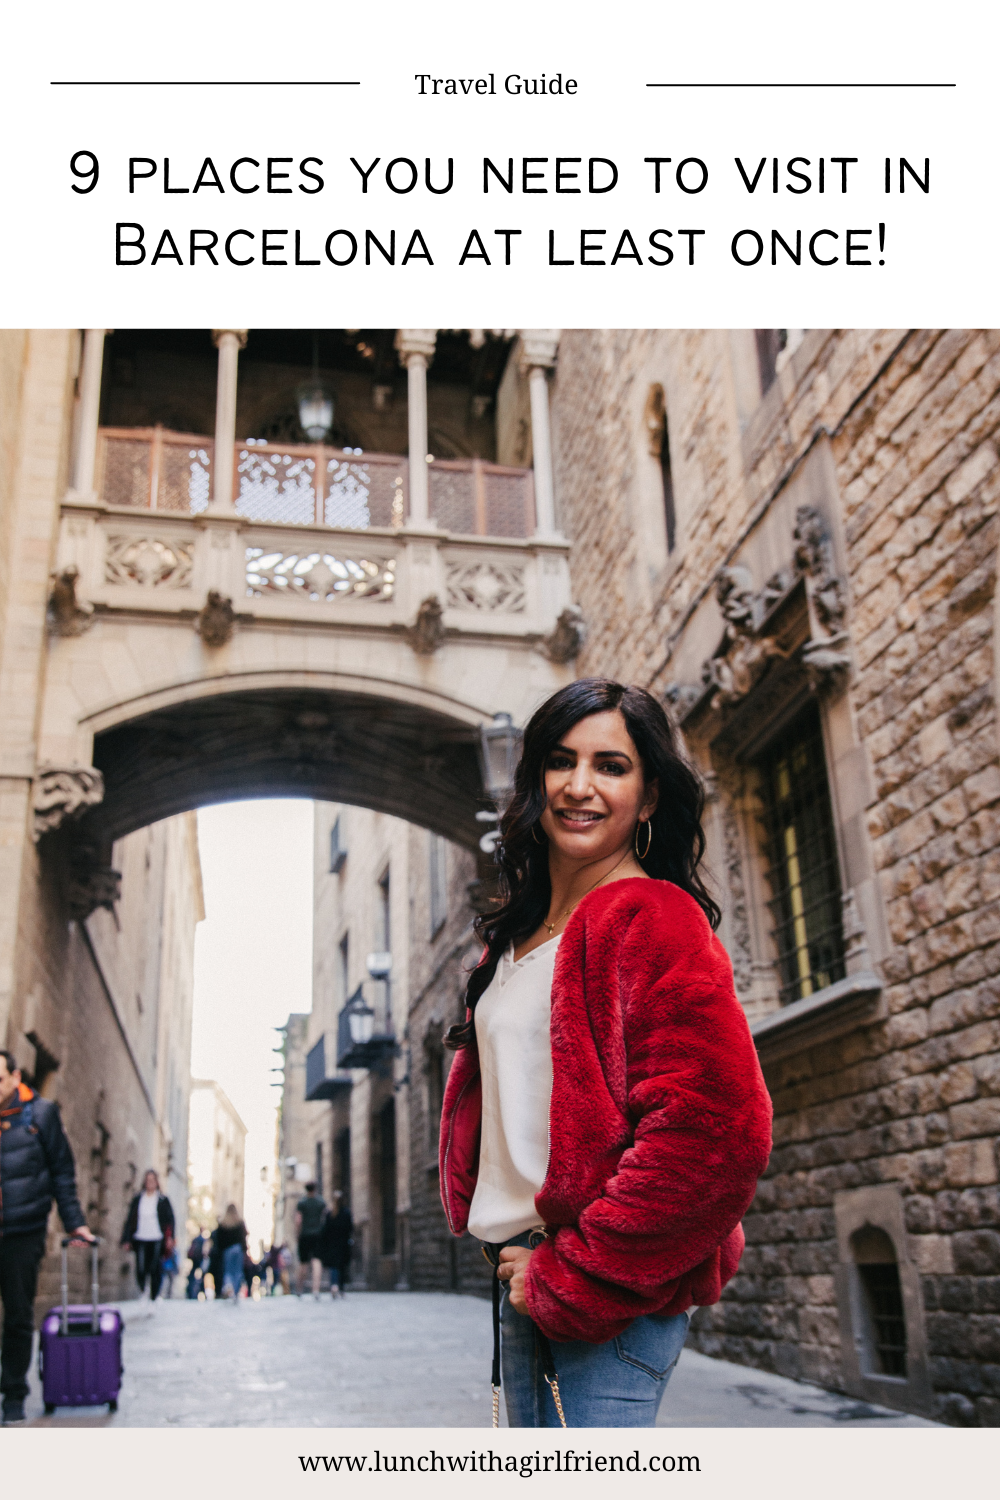 9 Places To Visit in Barcelona